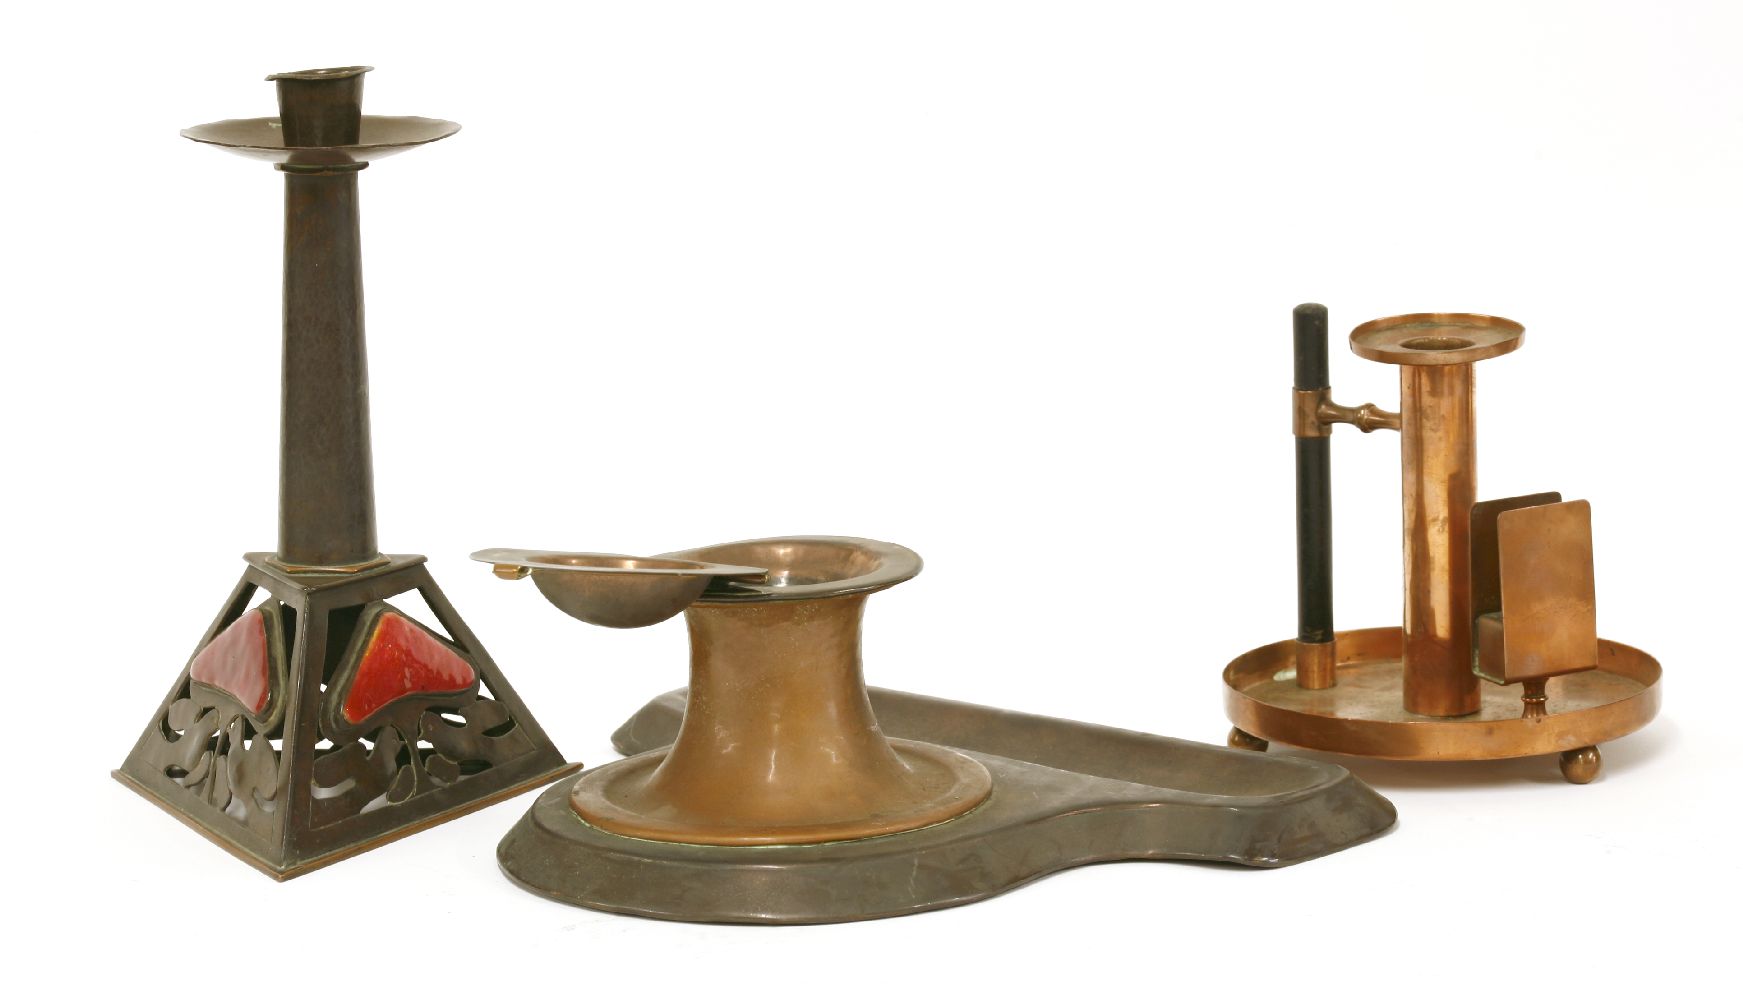 An Arts and Crafts copper desk stand,by Rathbone, with an hinged inkwell, lacking a glass liner, and